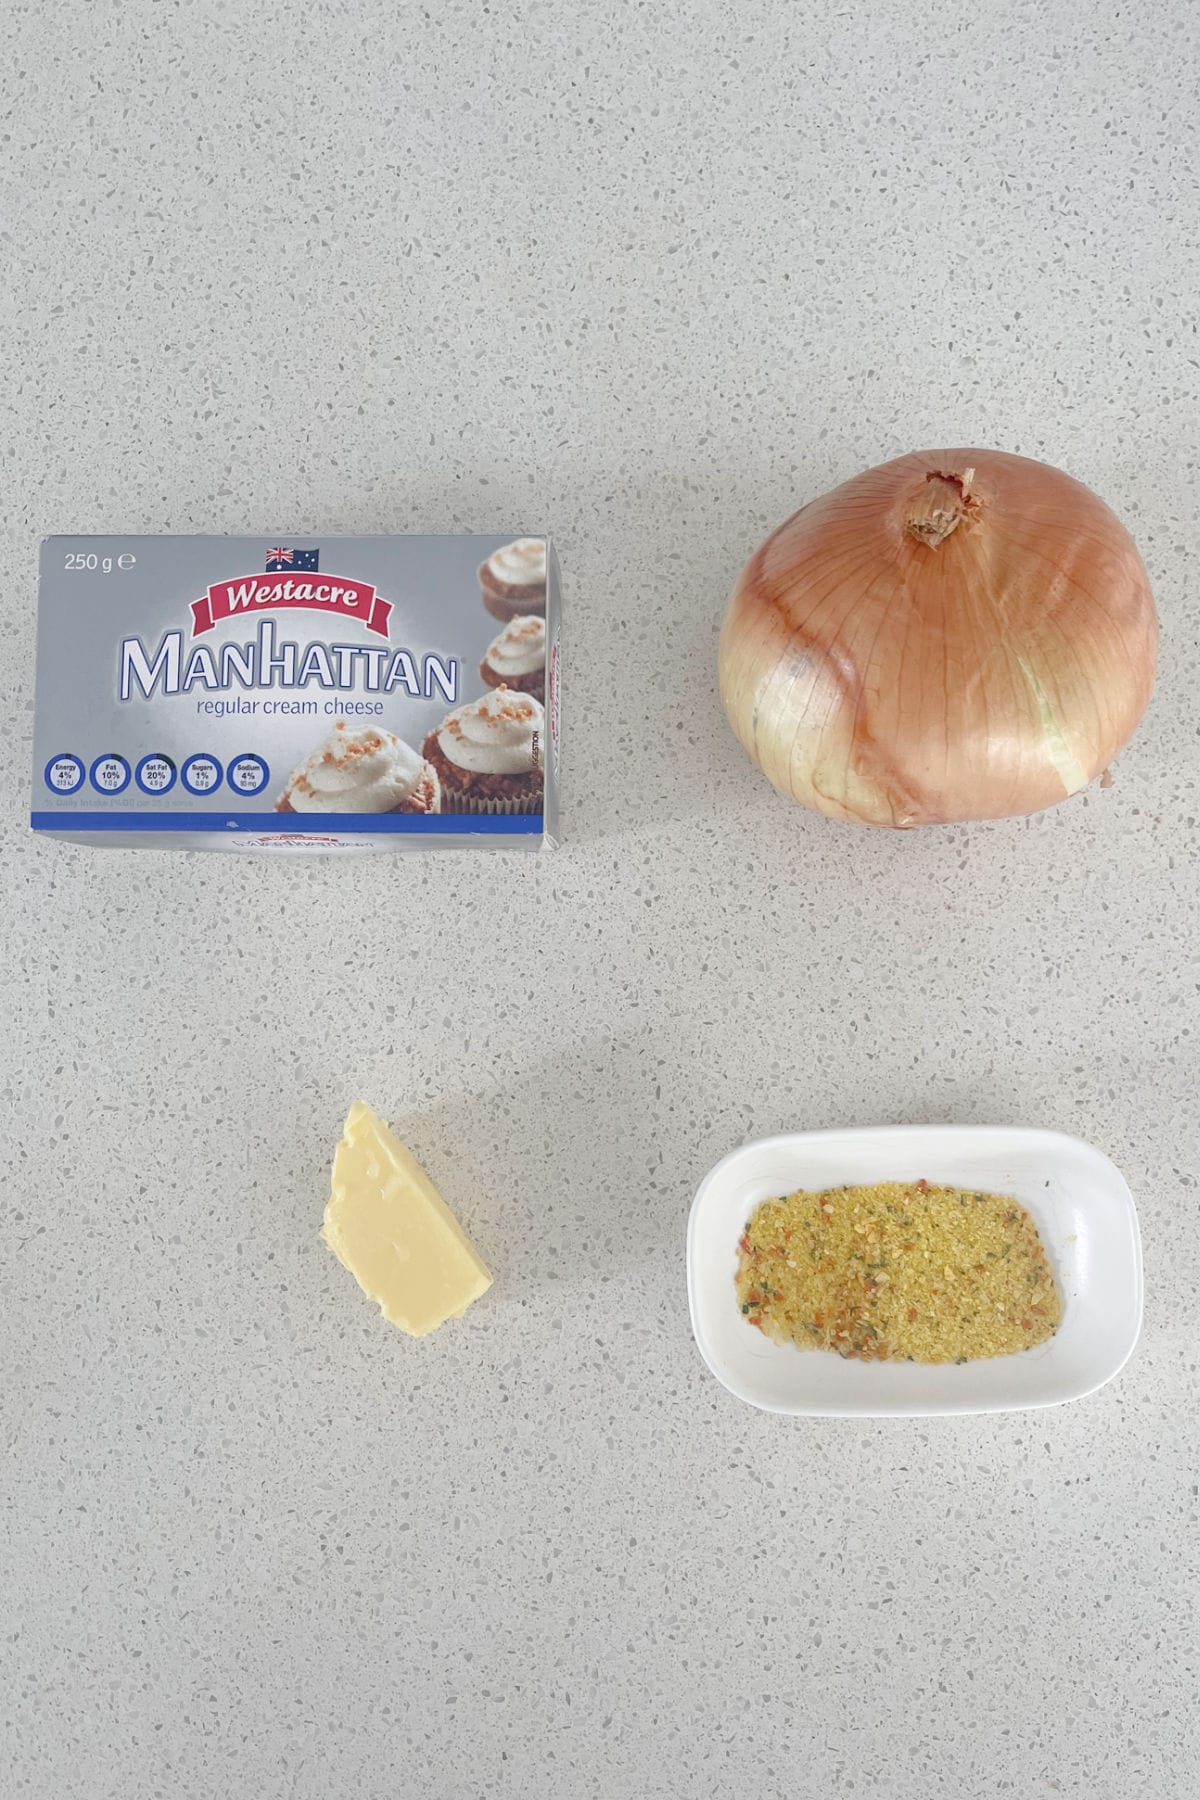 Ingredients to make French Onion Dip in a Thermomix on a speckled bench.